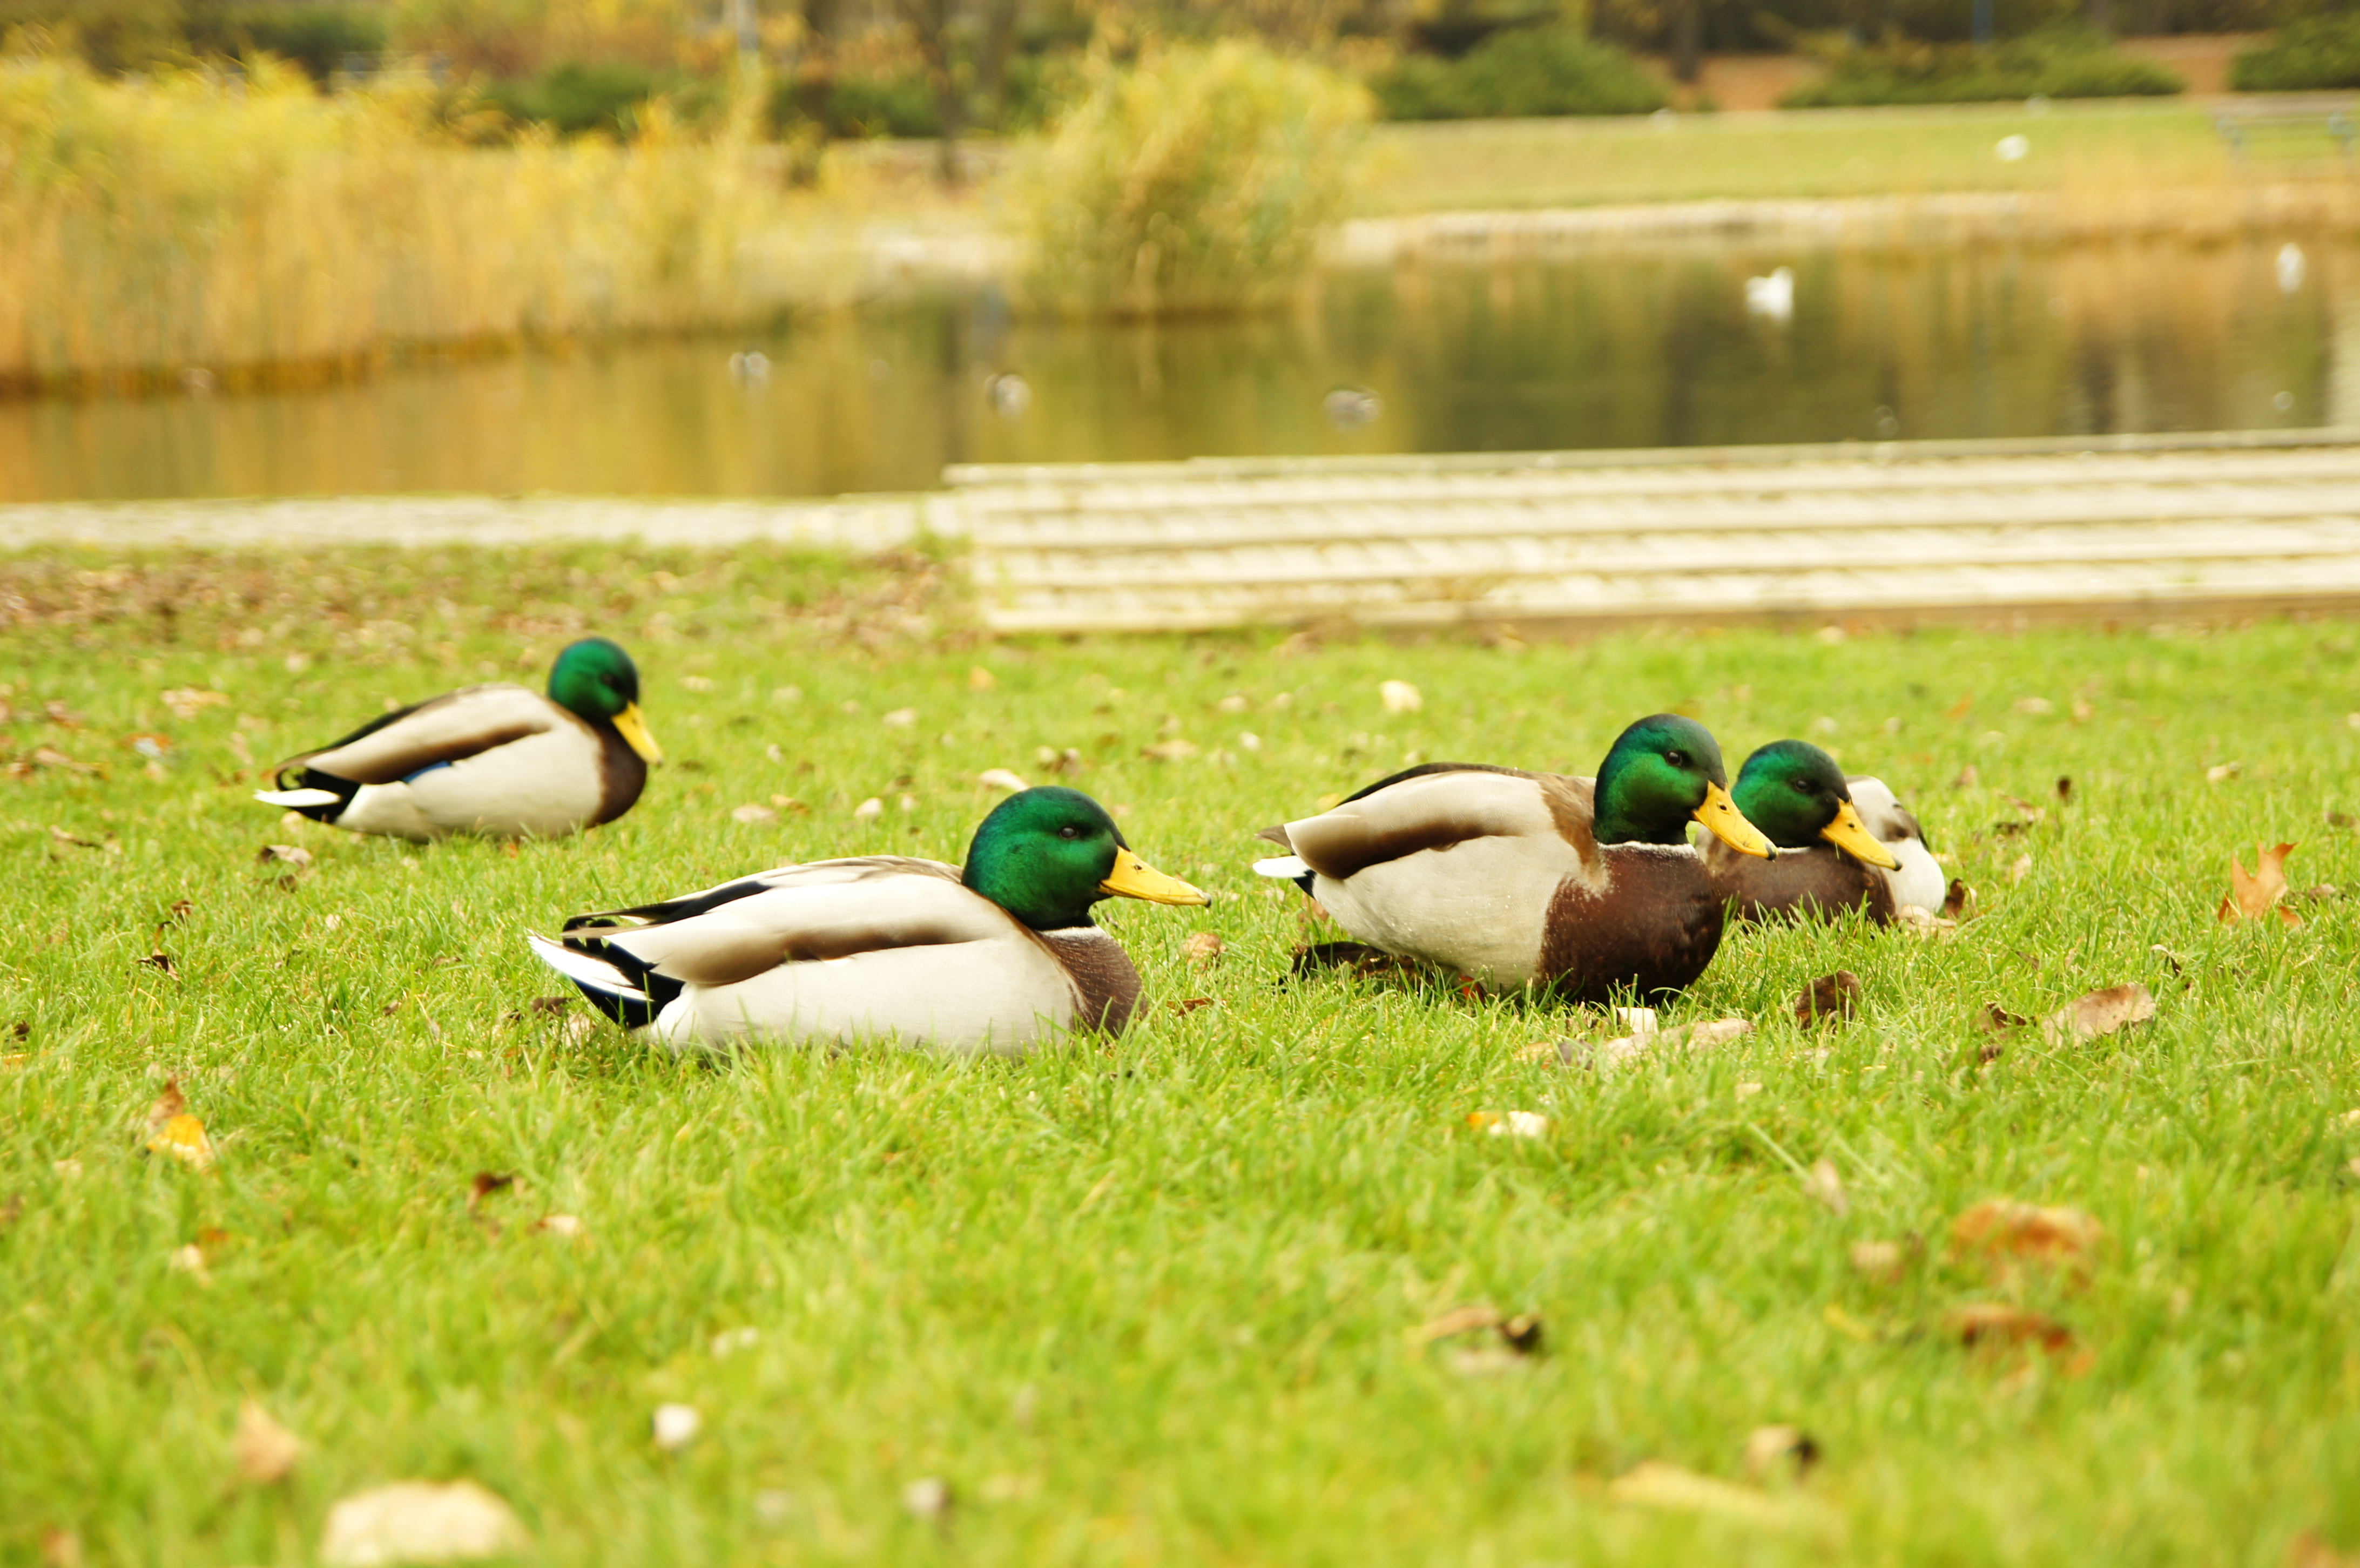 Four wild ducks on the grass - Our Great Photos